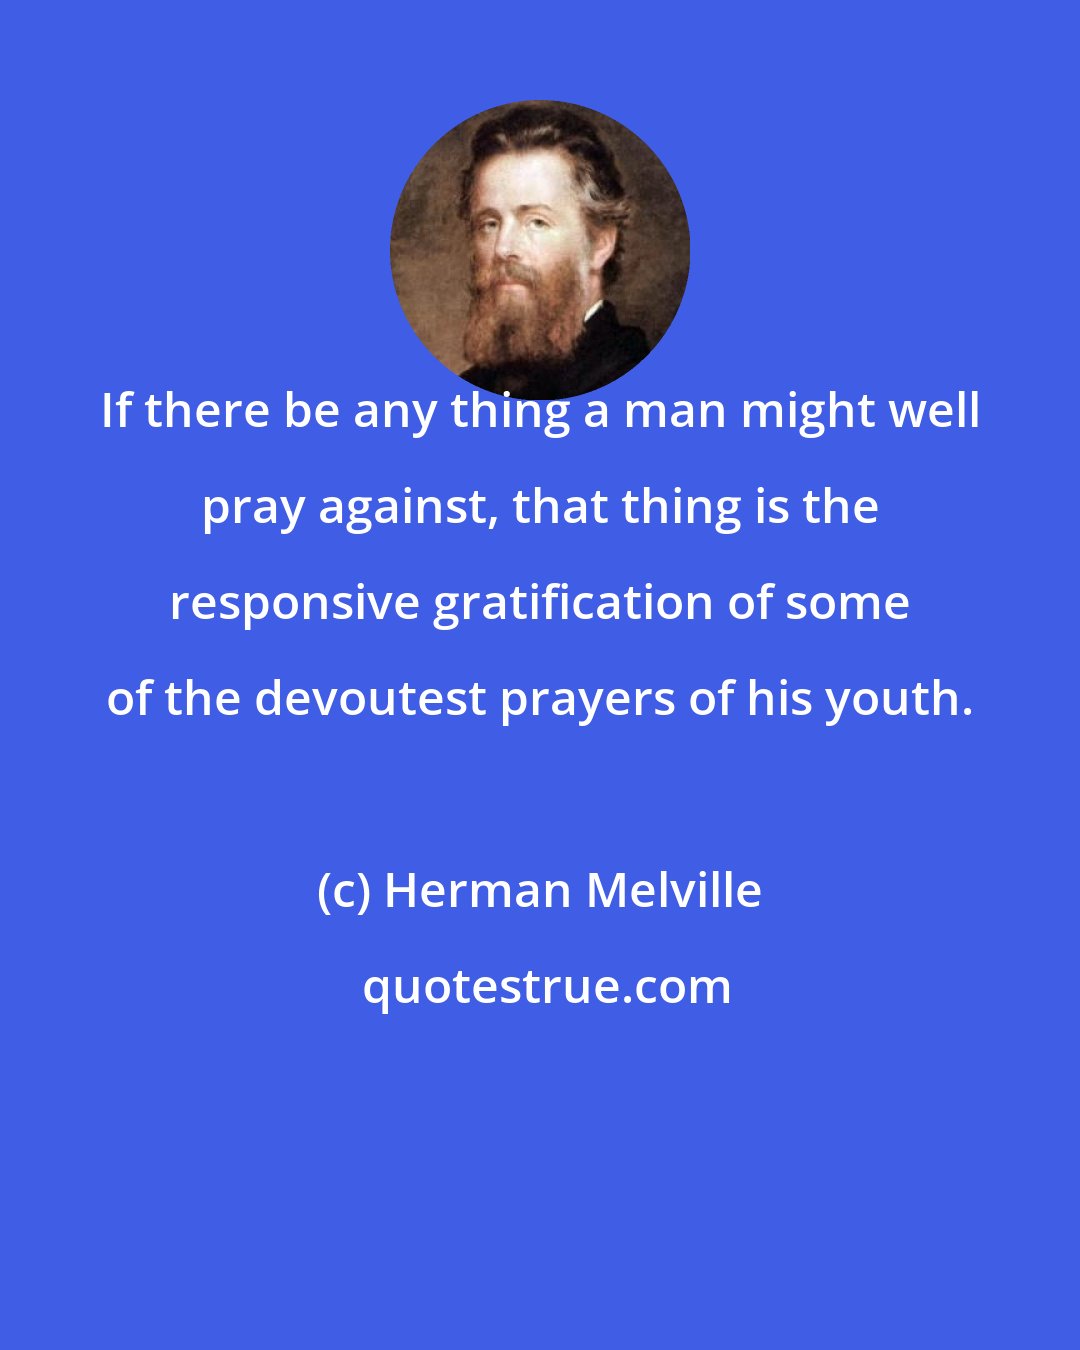 Herman Melville: If there be any thing a man might well pray against, that thing is the responsive gratification of some of the devoutest prayers of his youth.